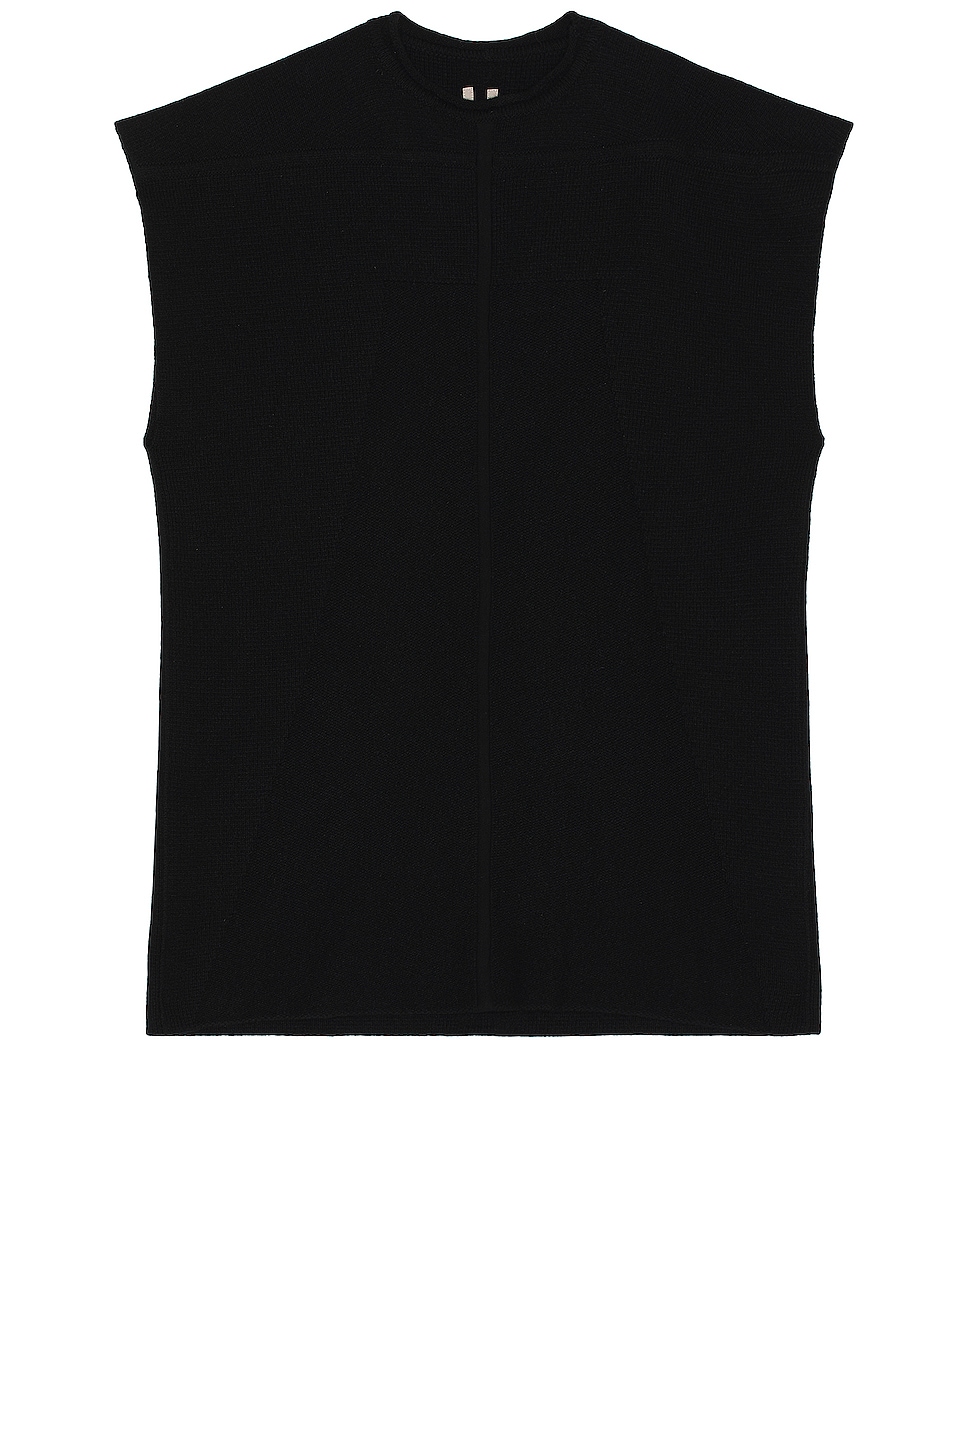 Image 1 of Rick Owens Sweater in Black